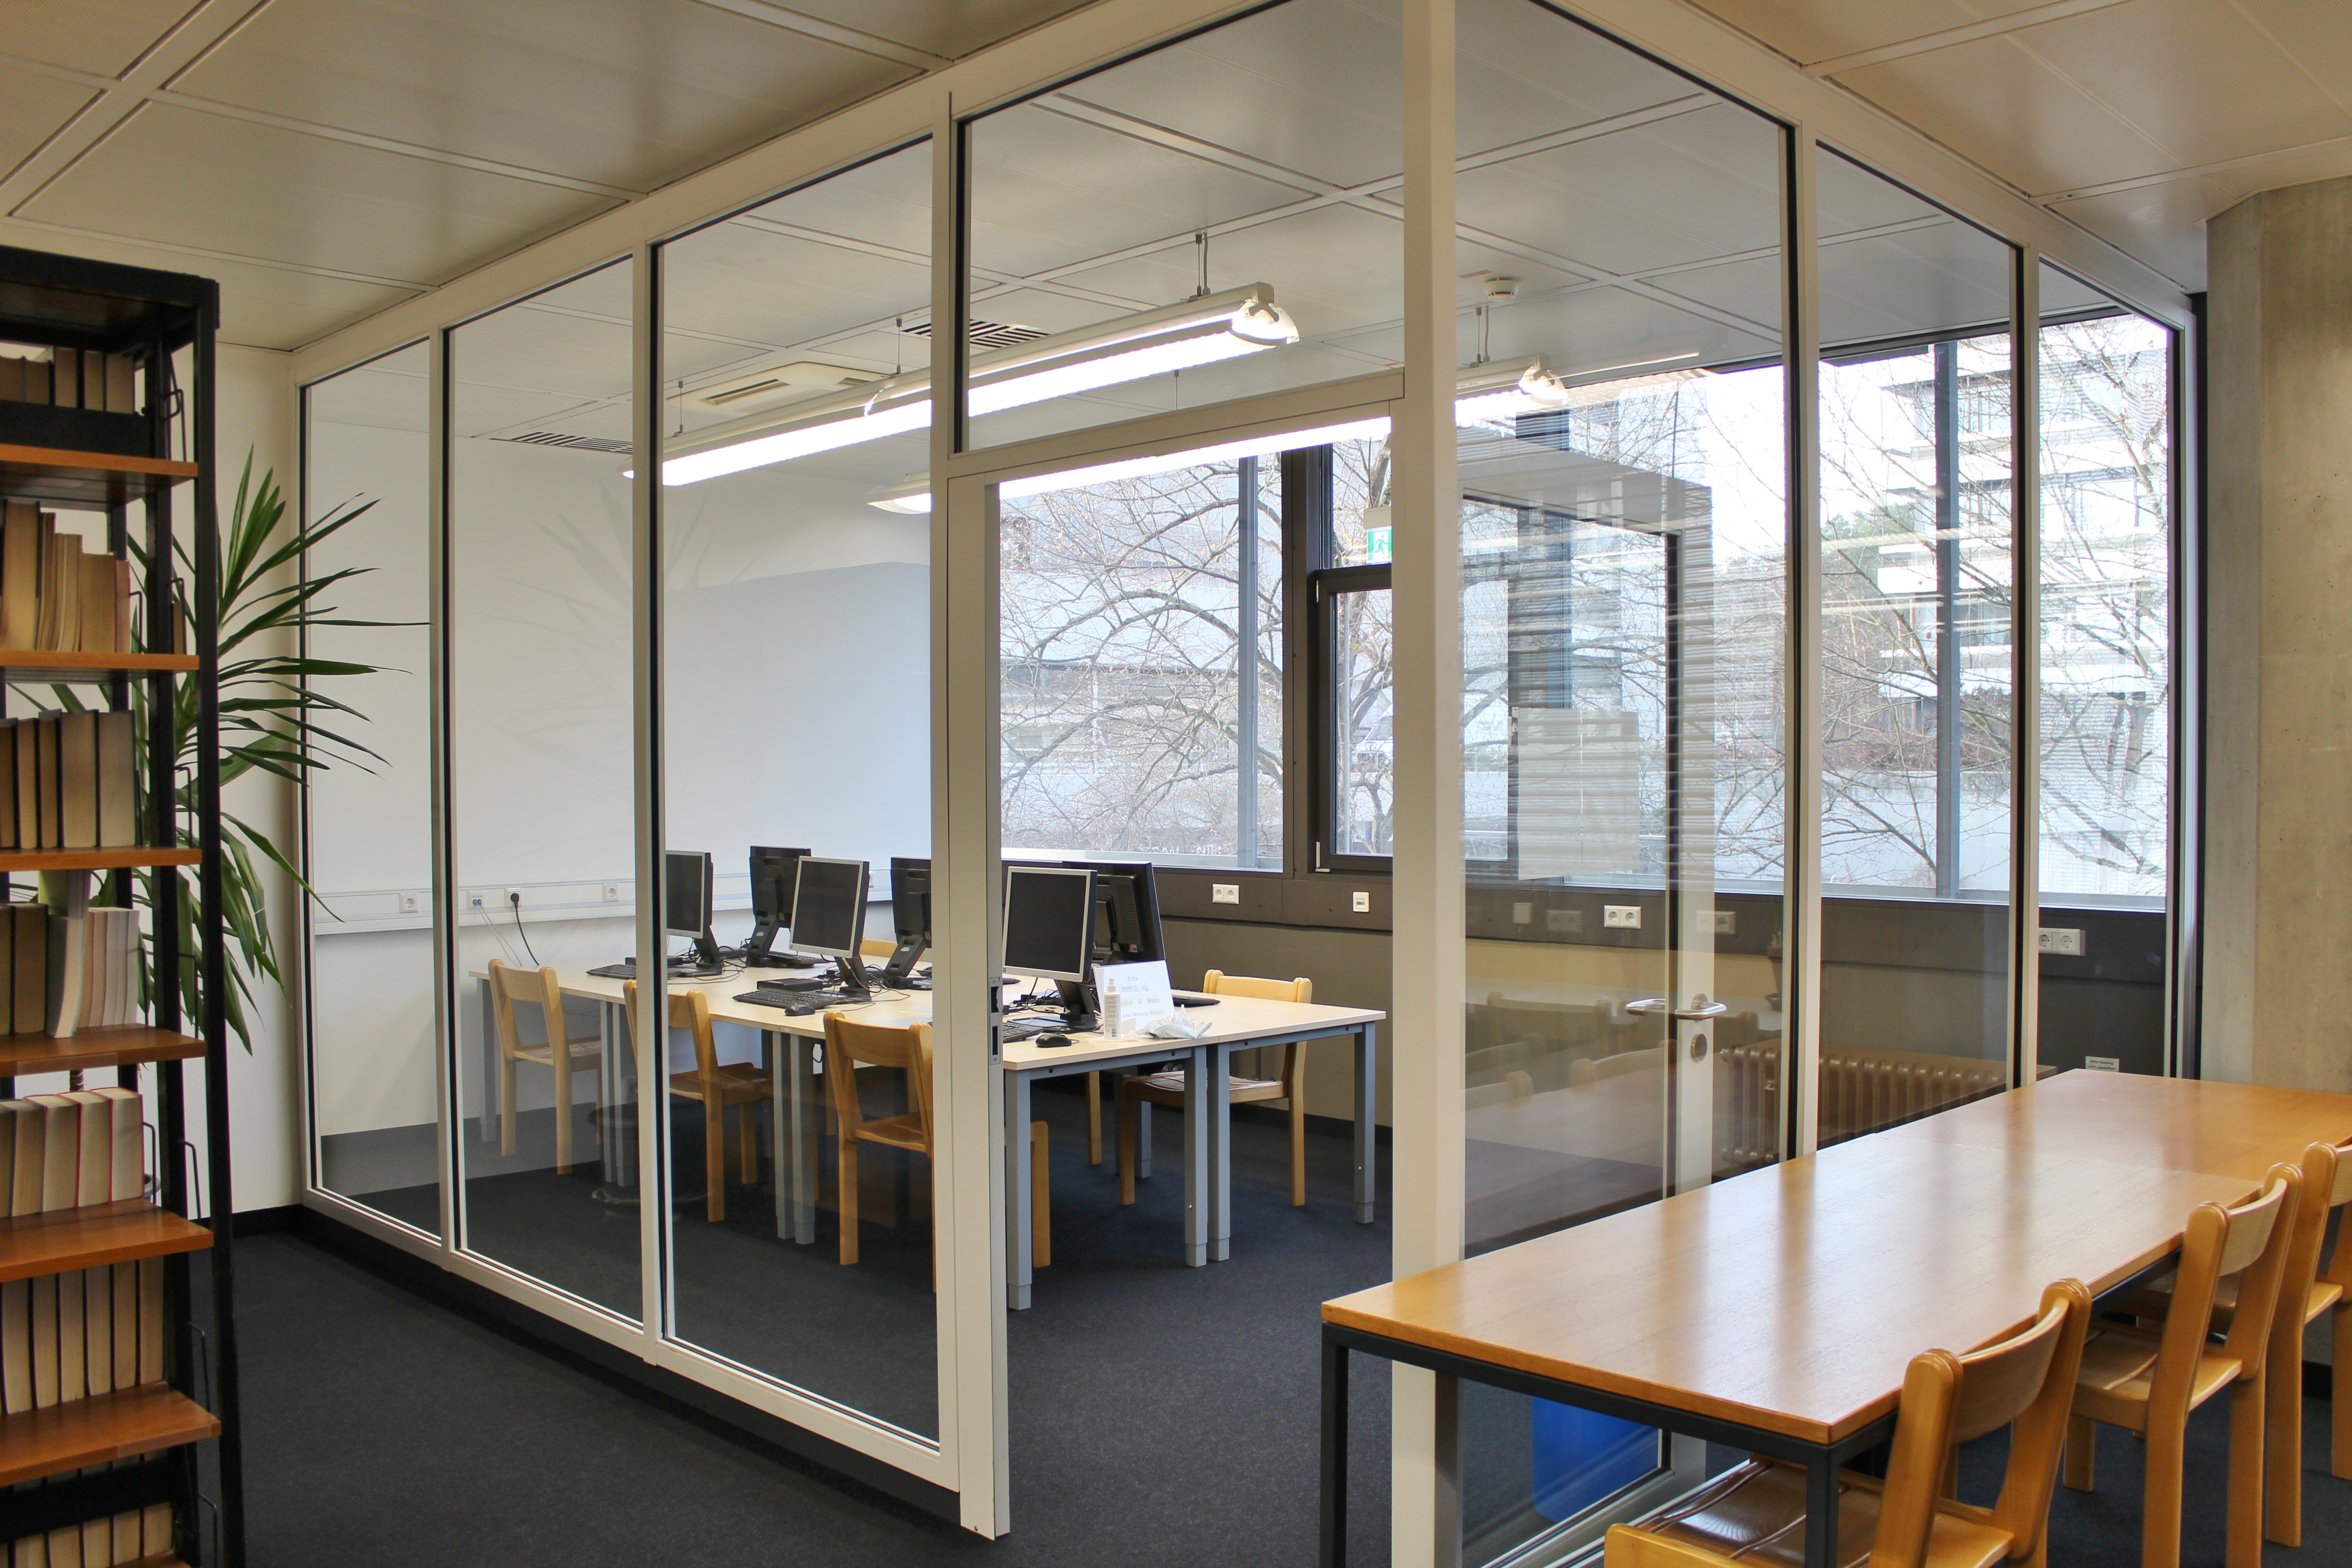 Six PCs are located in a glass room within the library.